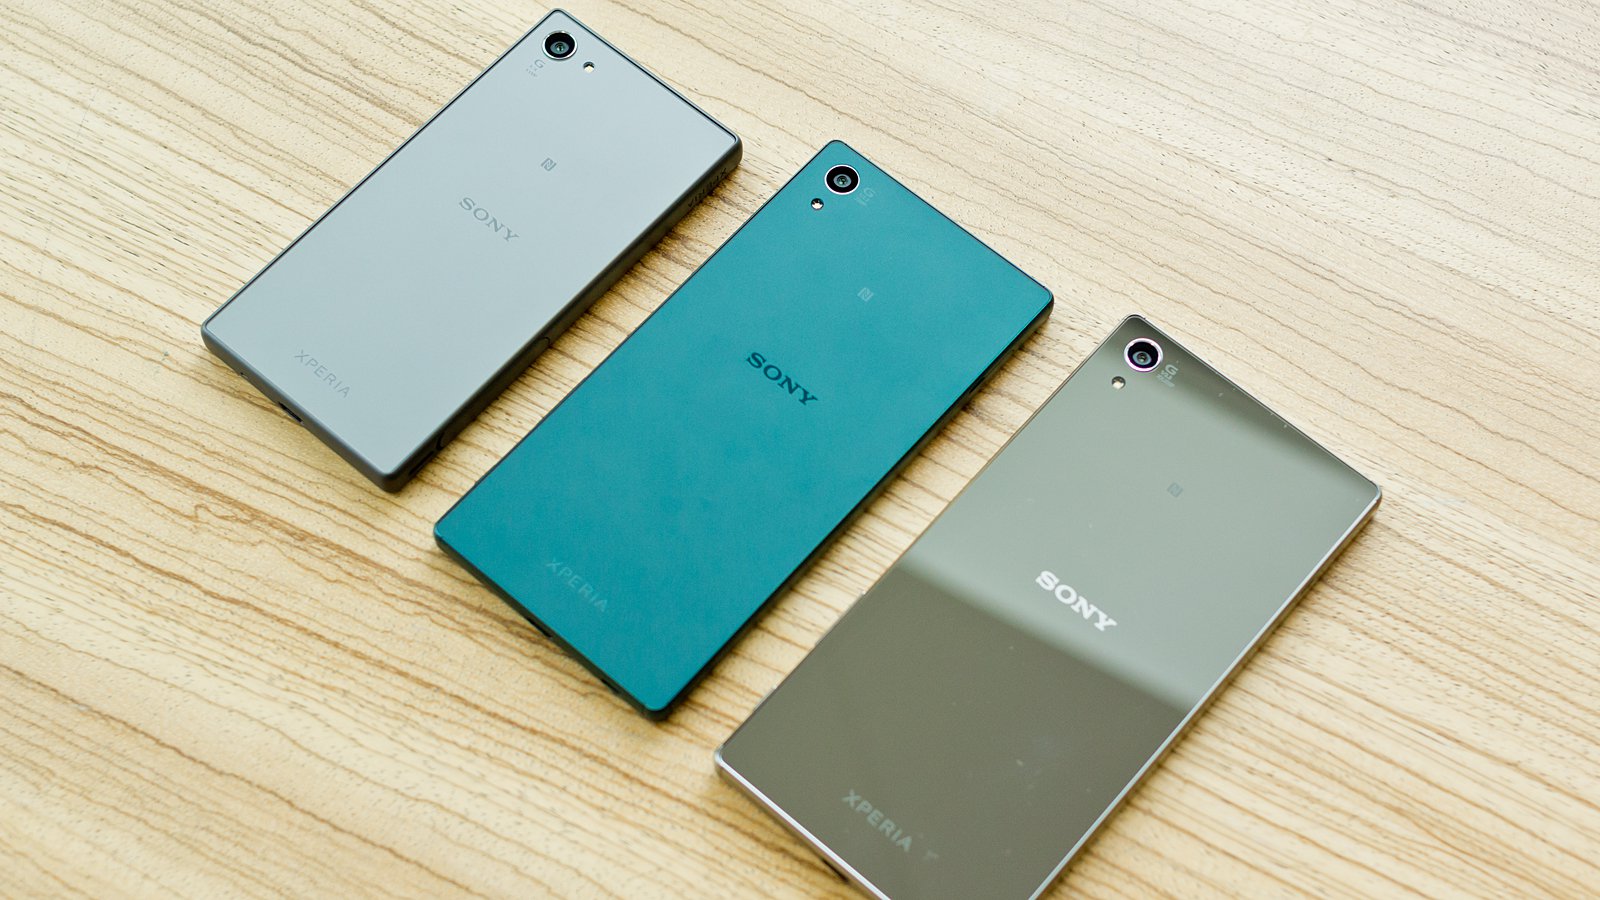 Disabling Handsfree Mode On Sony Xperia Z3: Simple Steps